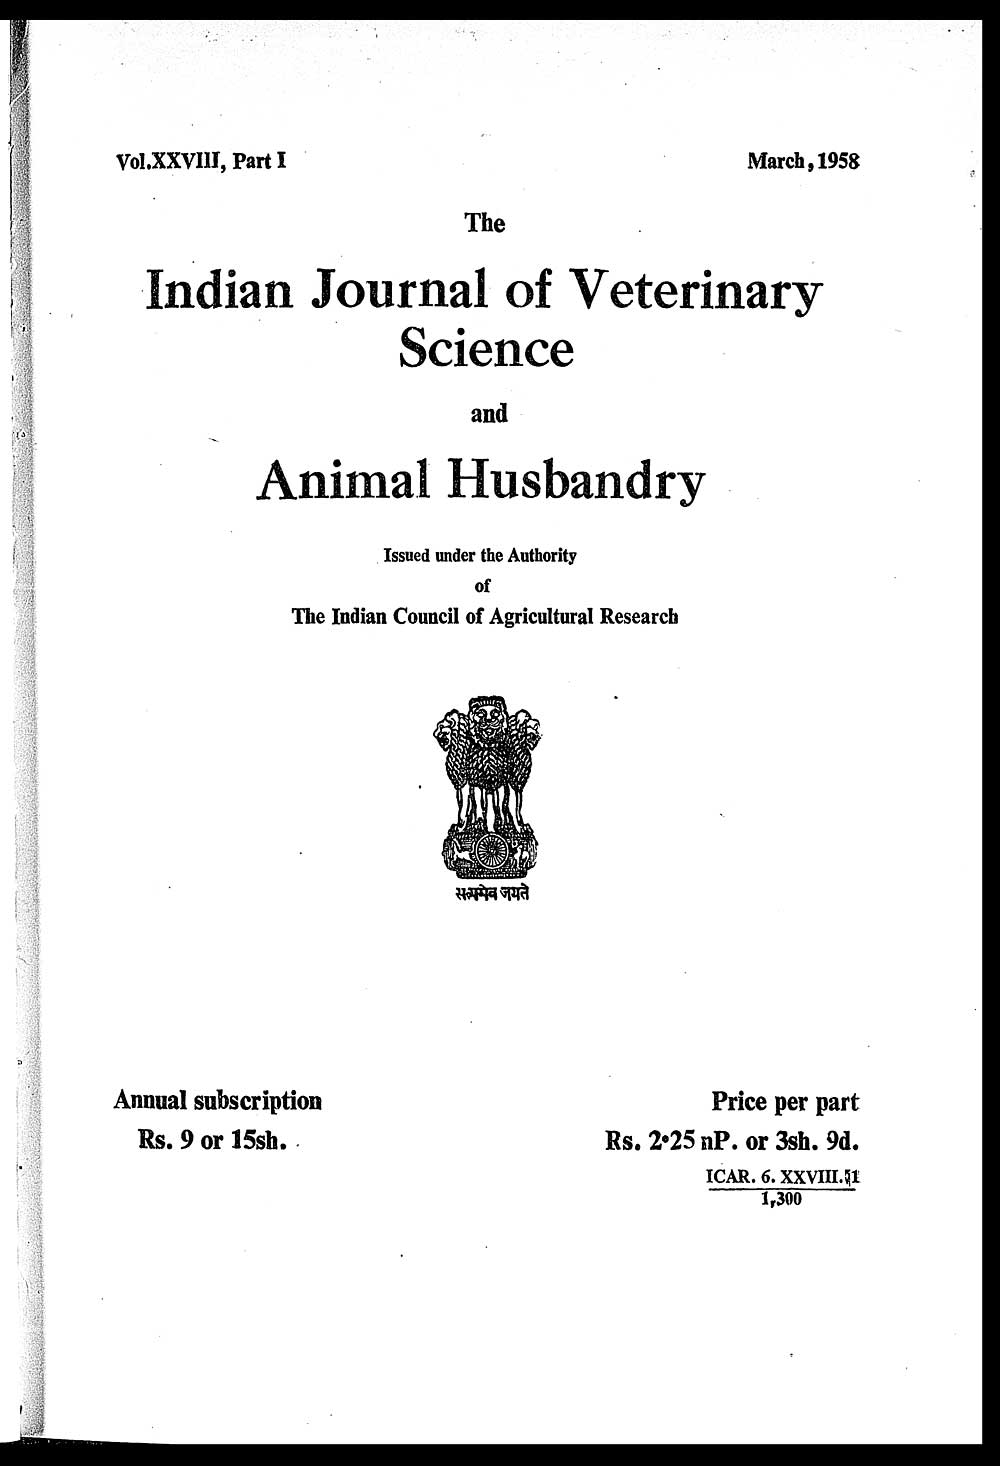 thesis title for veterinary medicine